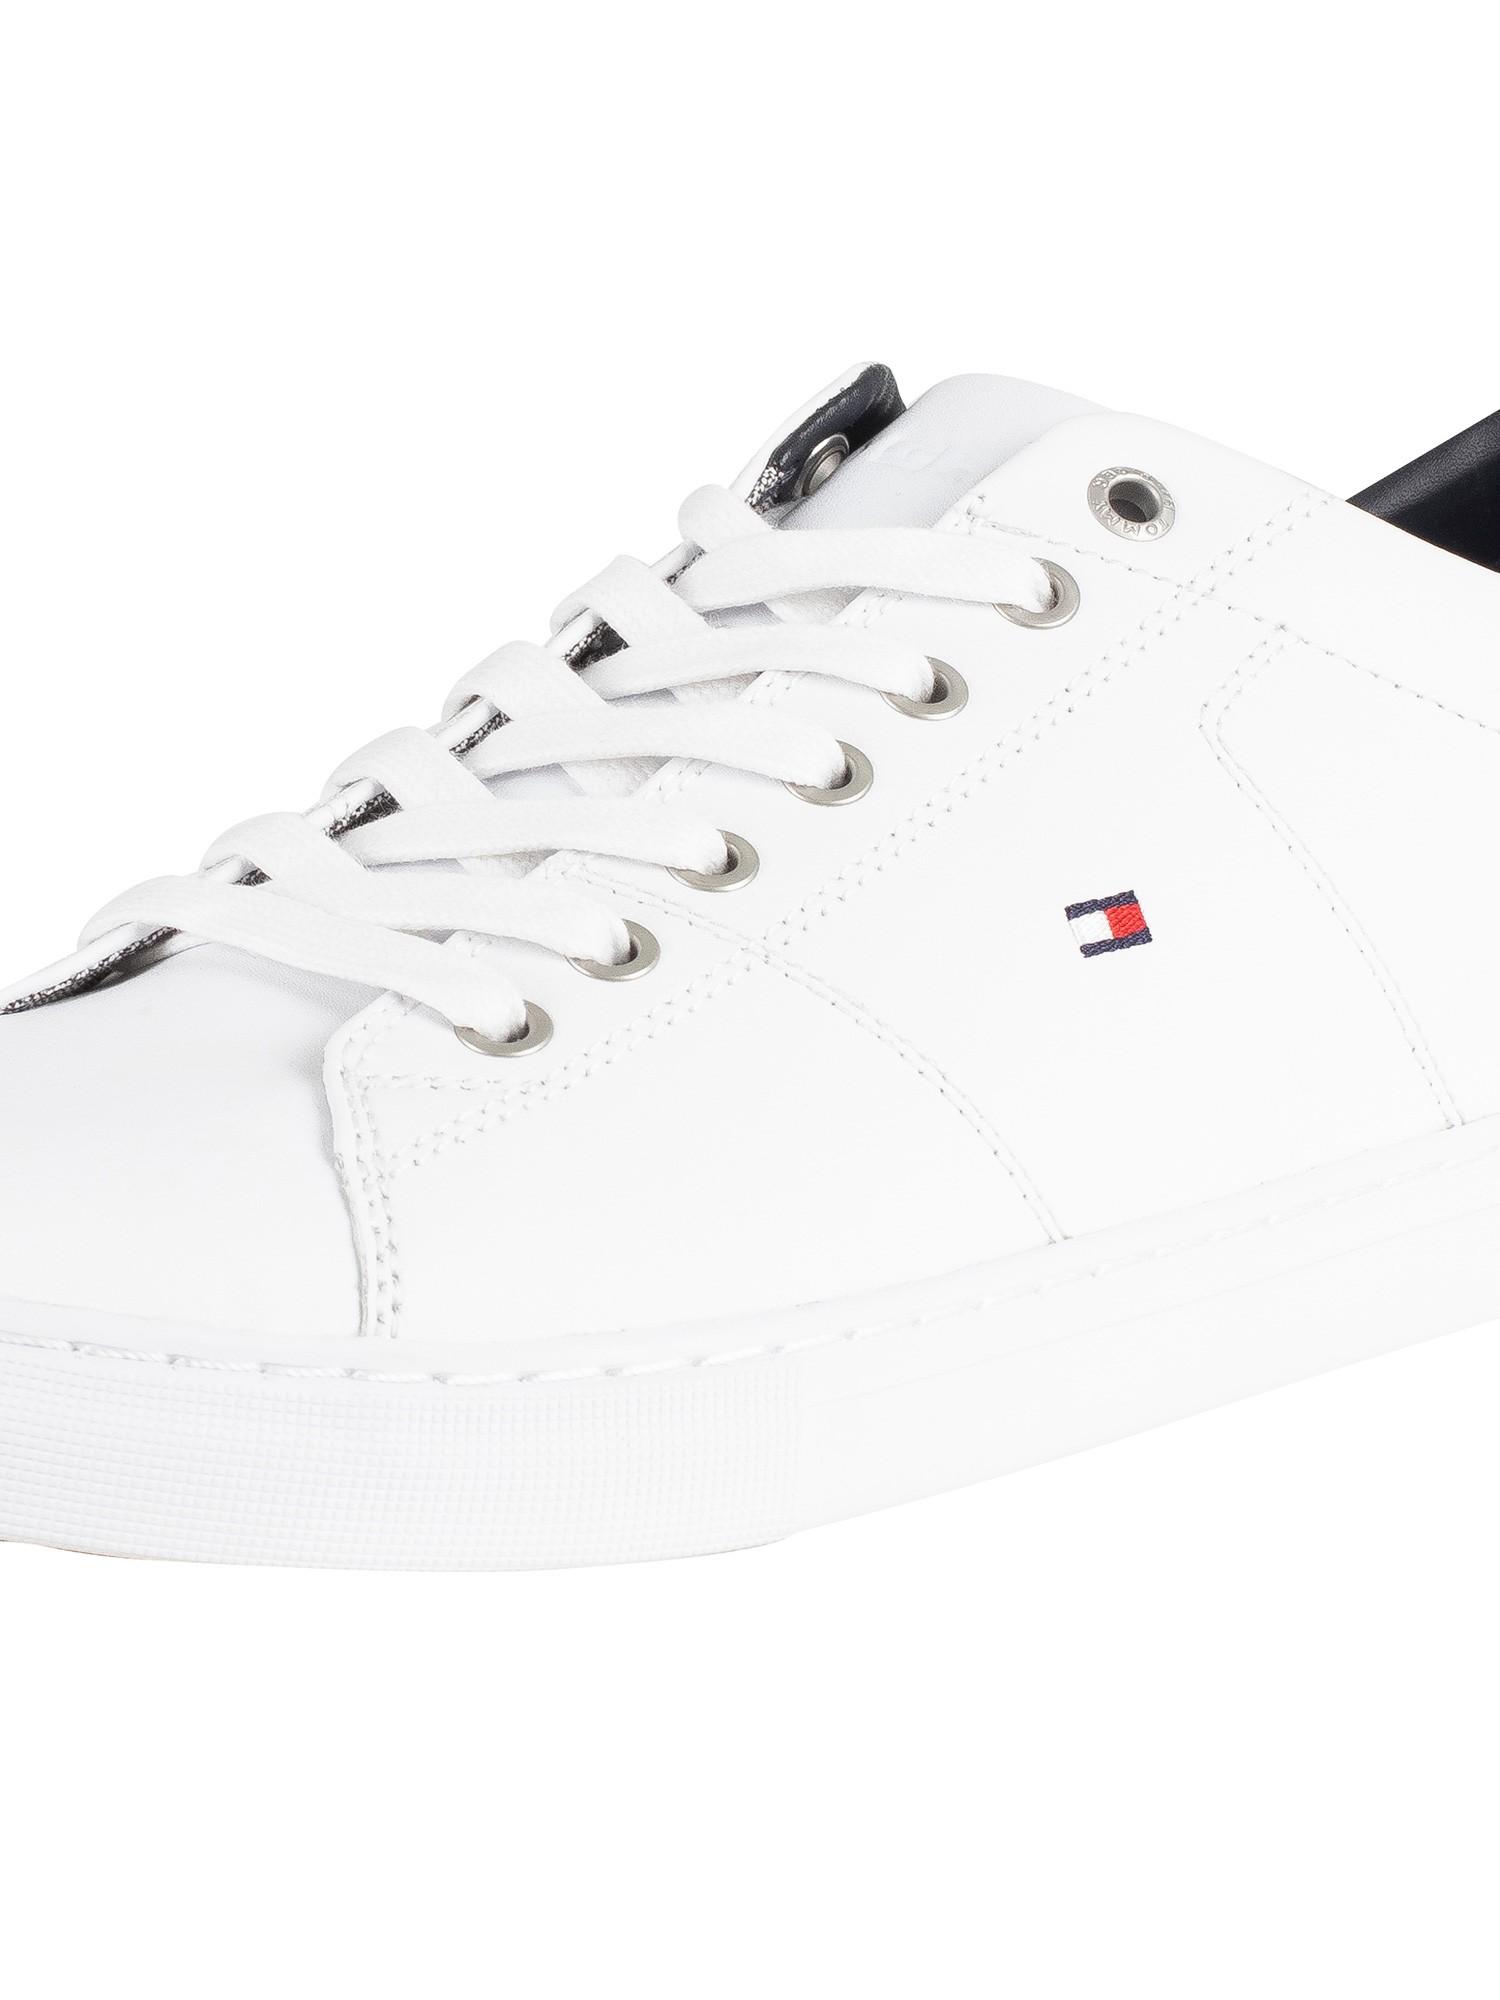 tommy hilfiger essential leather sneaker